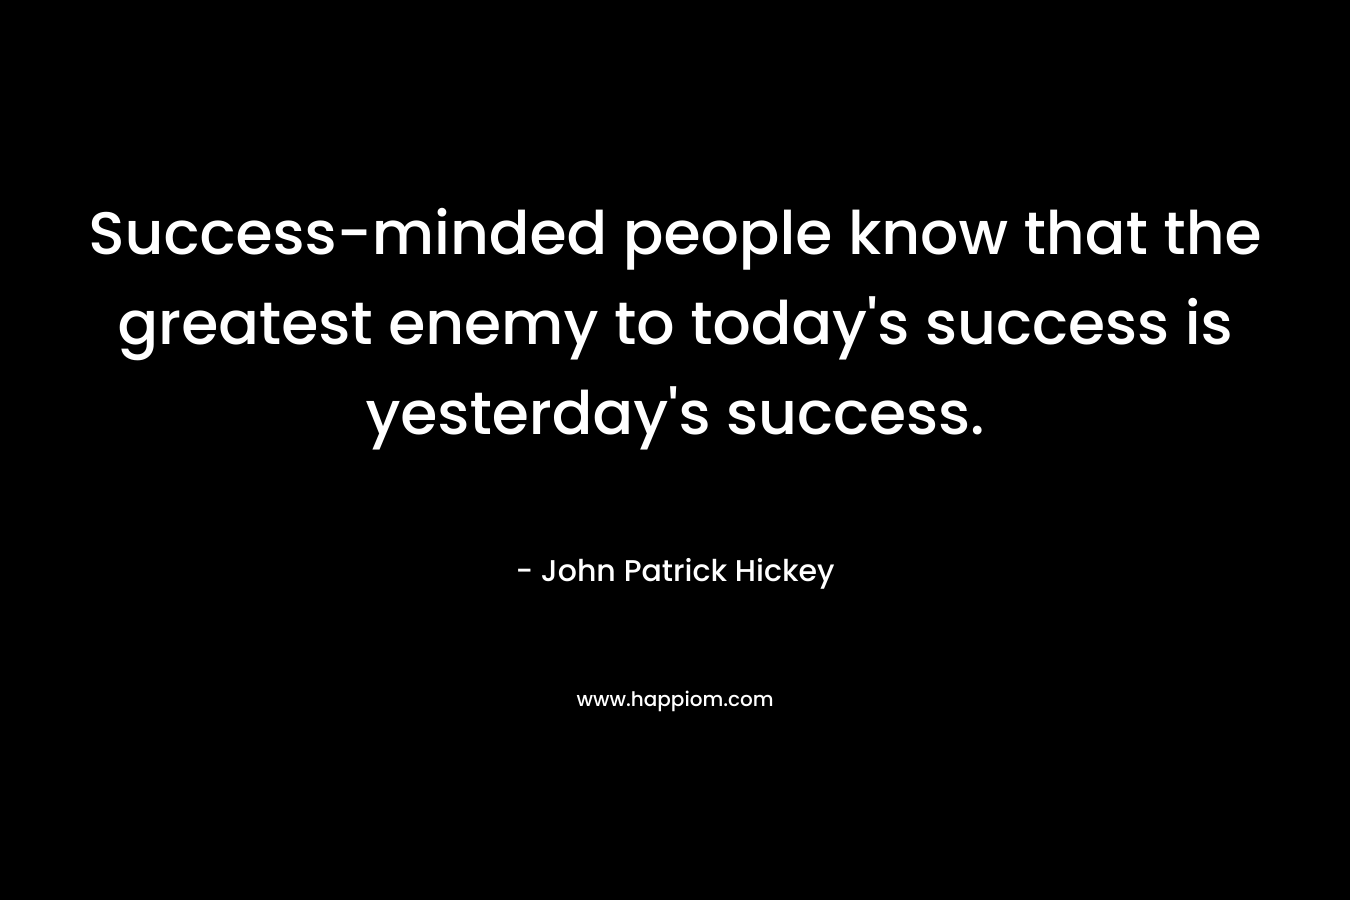 Success-minded people know that the greatest enemy to today's success is yesterday's success.